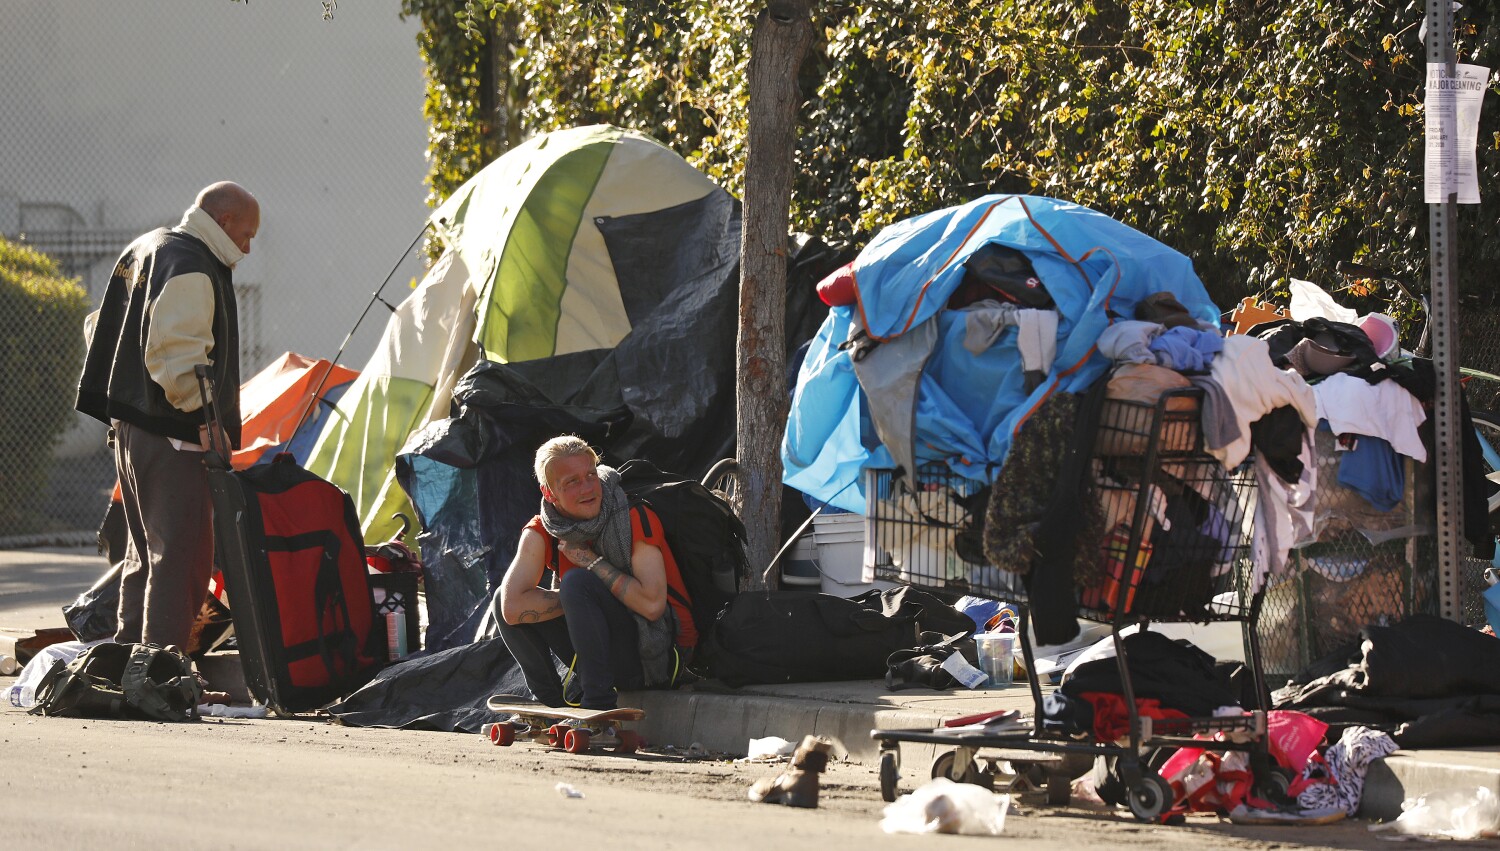 U.S. appeals court says L.A. can't seize and discard homeless people's bulky property